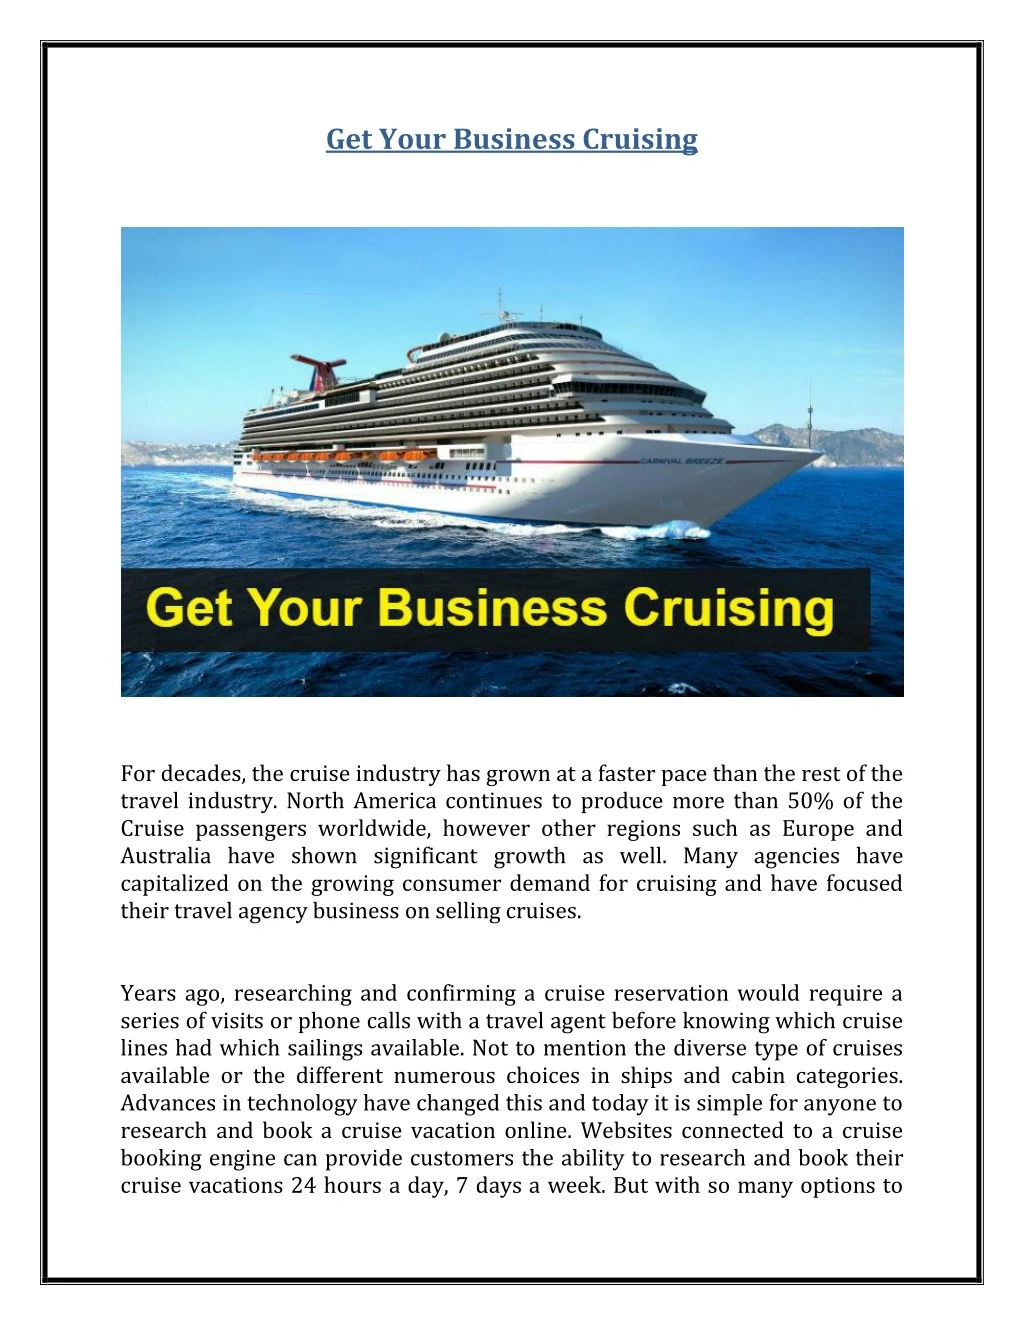 get your business cruising